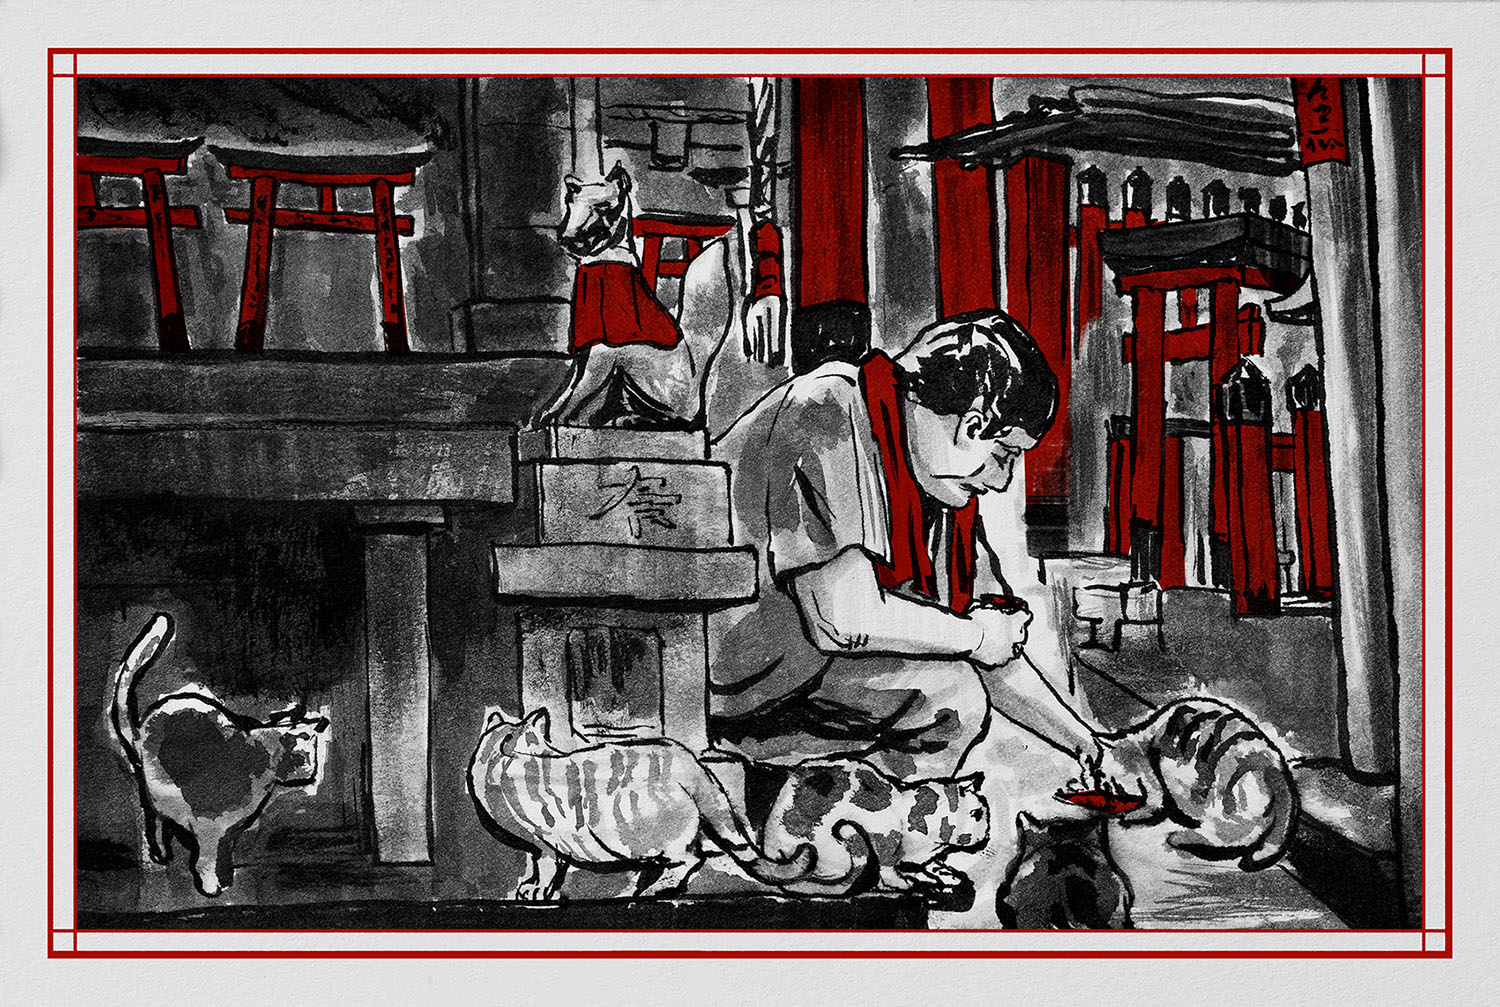 A still images of a man feeding cats from Allan's work Yoru no Torii